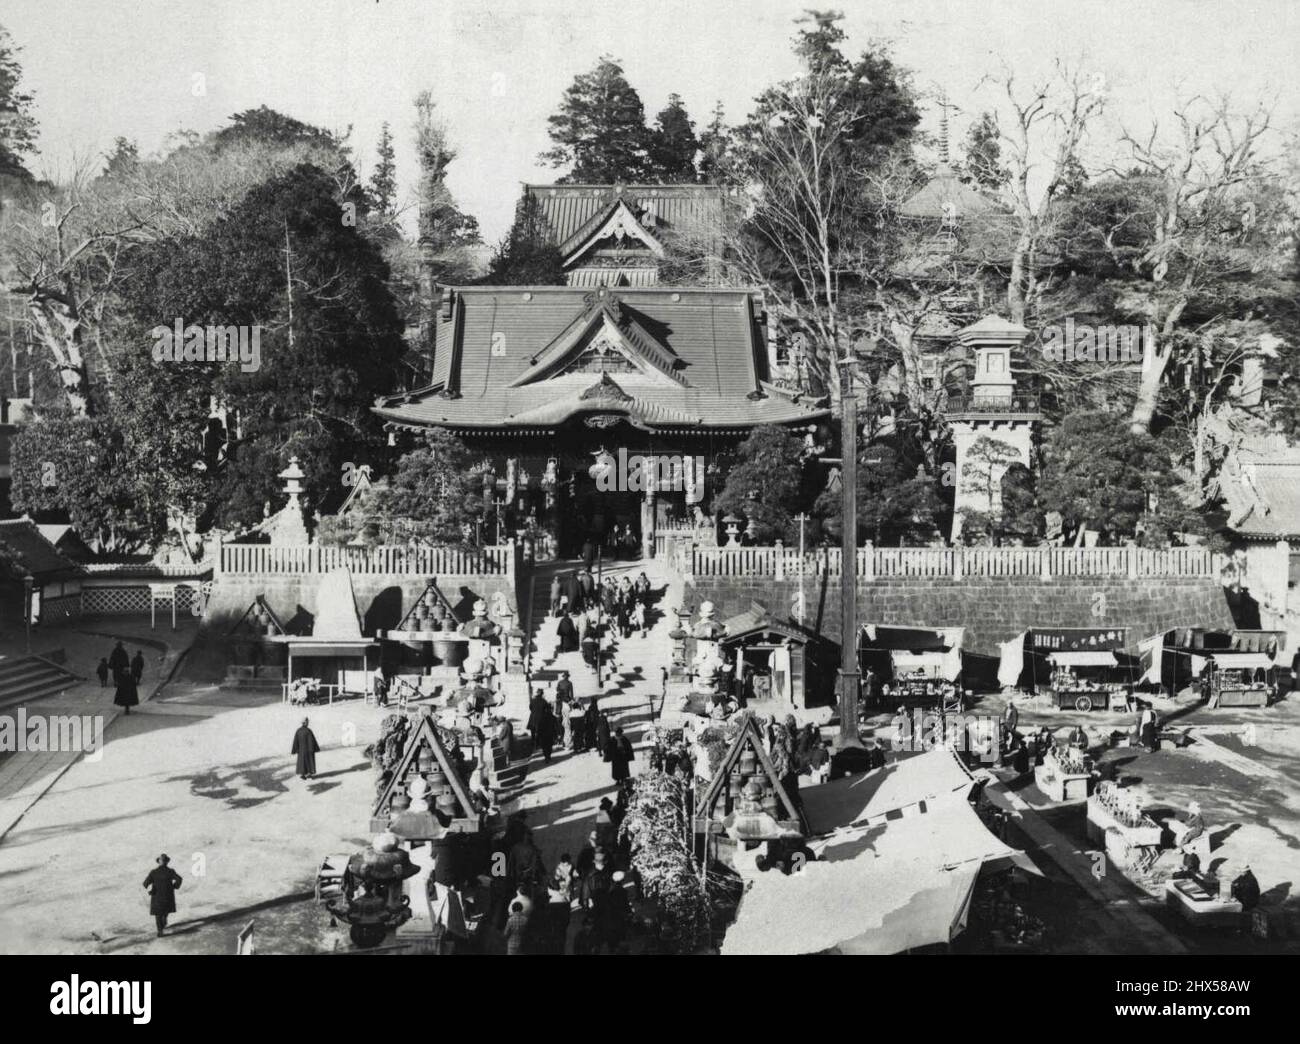 One of the most typical temple building in Japan, with such sub-buildings, as Sanmon or entrance gate, pagoda, main building etc. This is Shinshoji temple at Chiba, some 50 miles east south ward from Tokyo, one of the notoricious temples in Japan. April 1, 1934. (Photo by Shimbun Rengo News Photo Service). Stock Photo